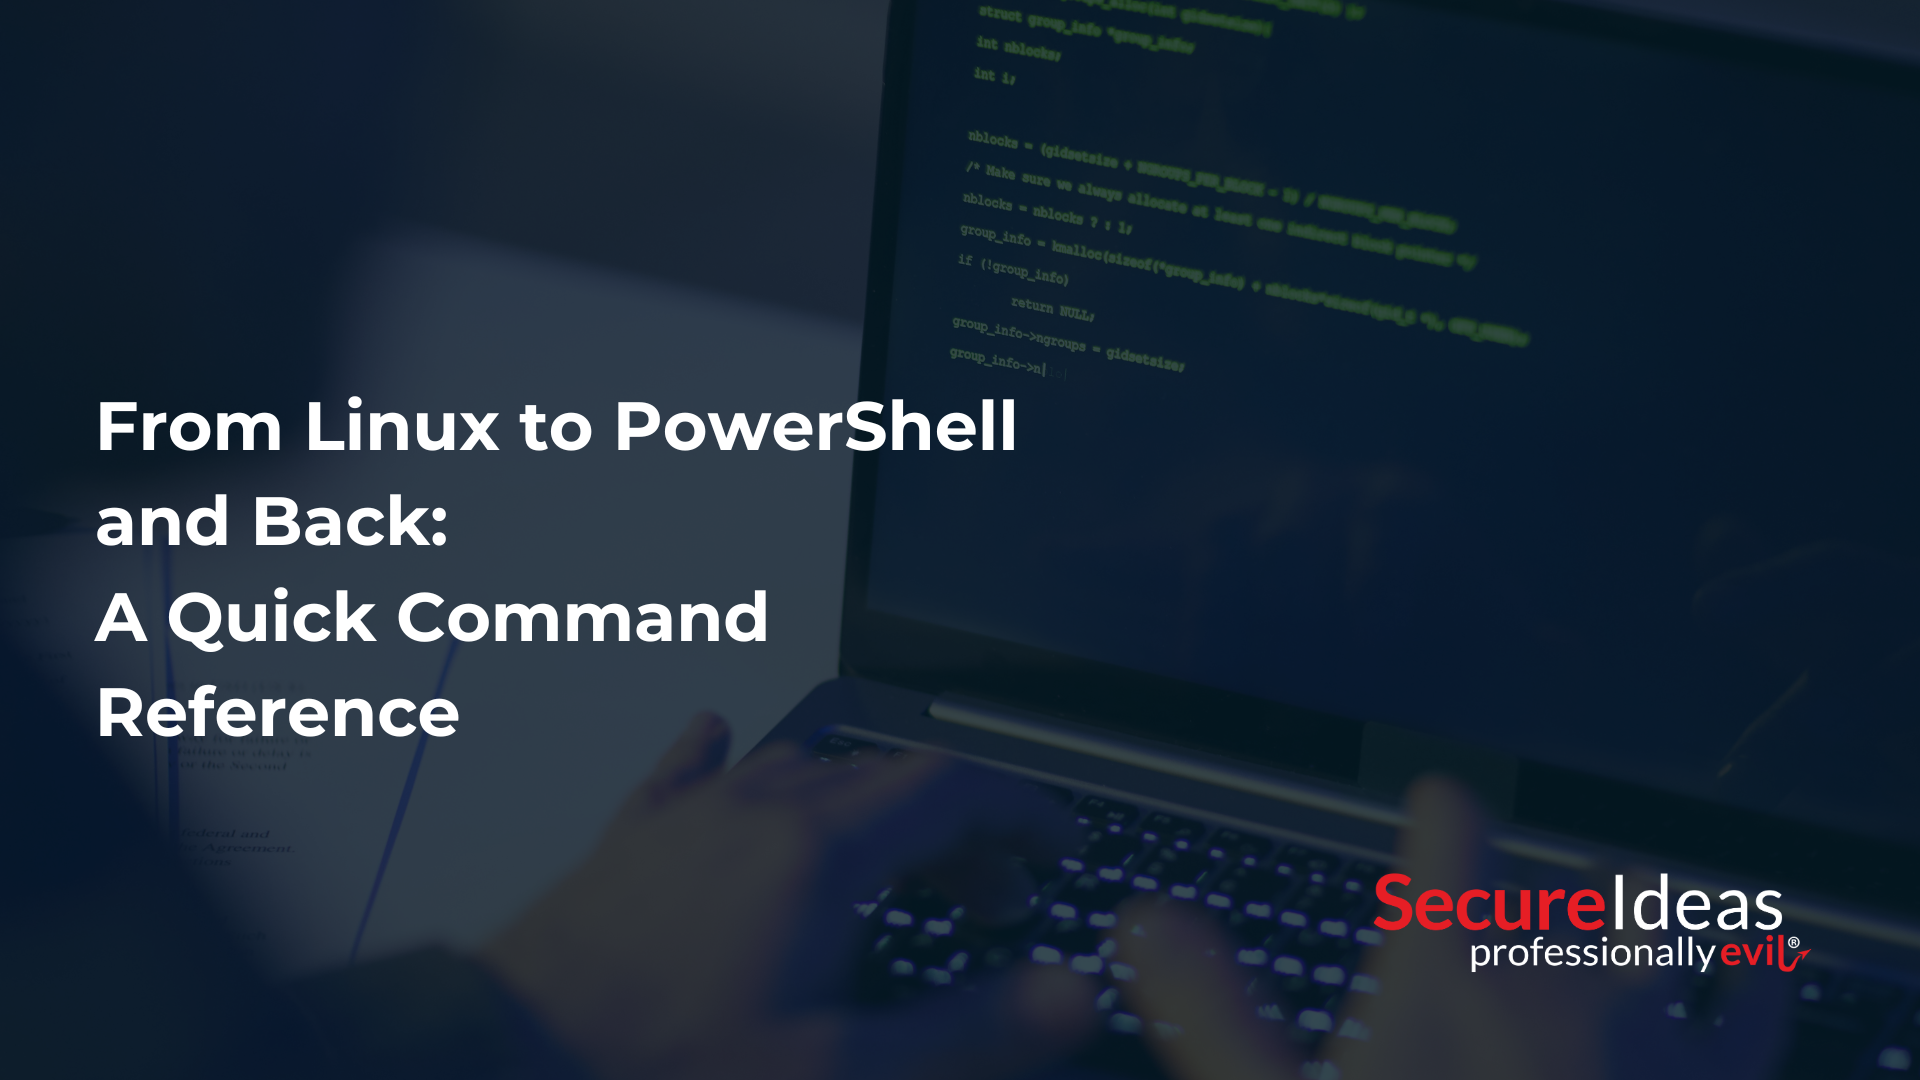 From Linux to PowerShell and Back: A Quick Command Reference